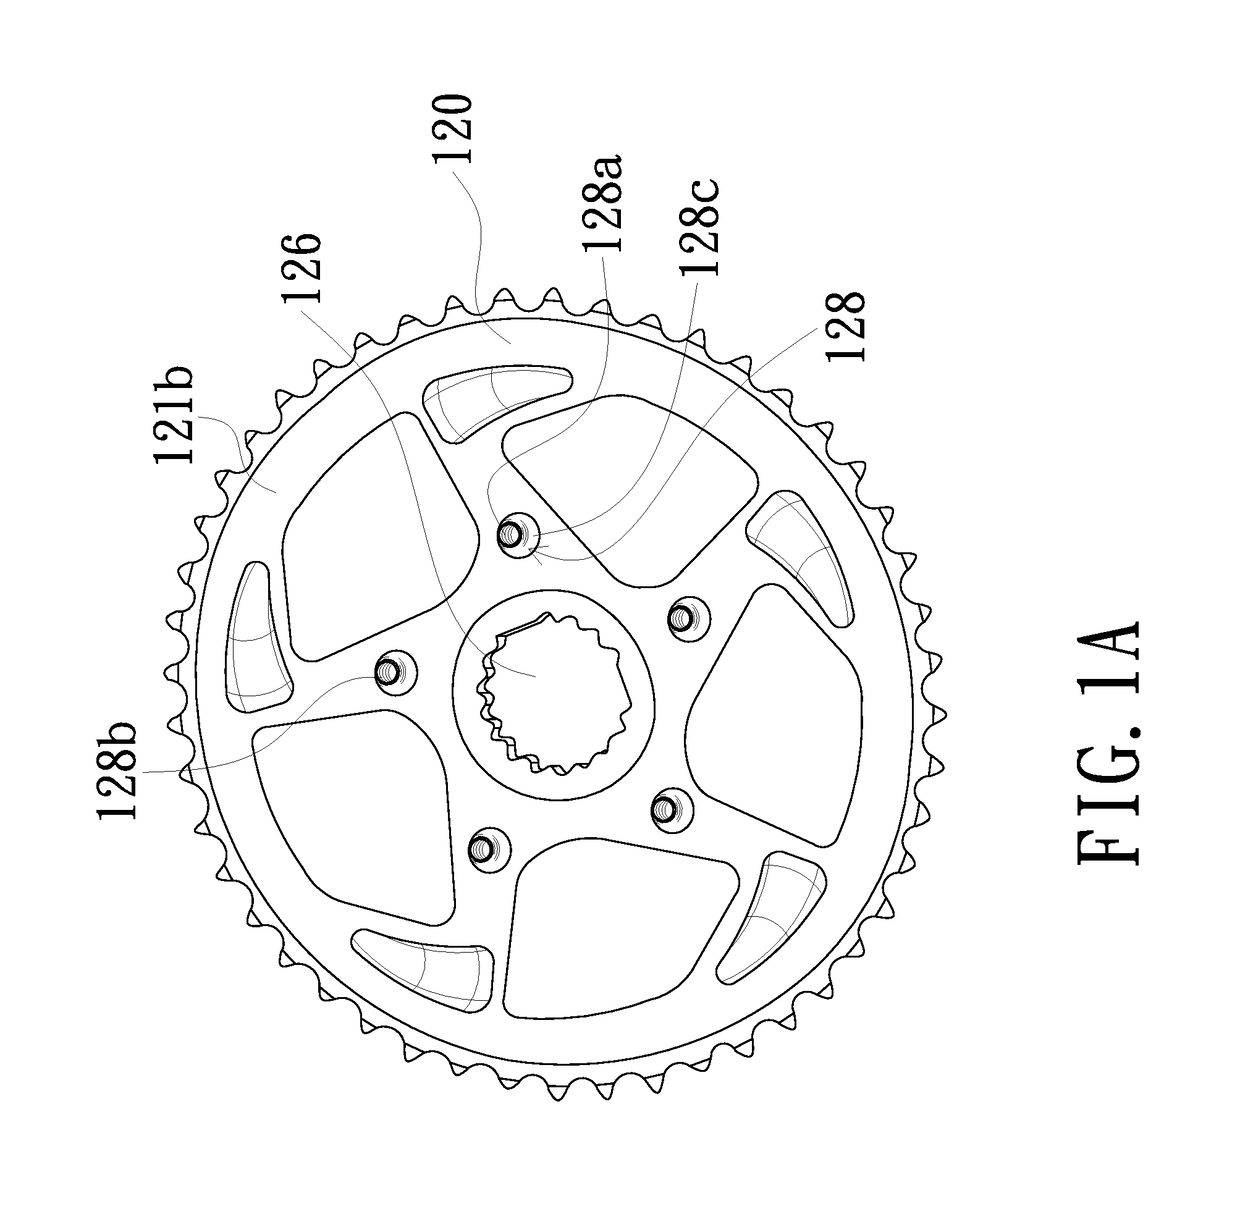 Detachable chainring assembly